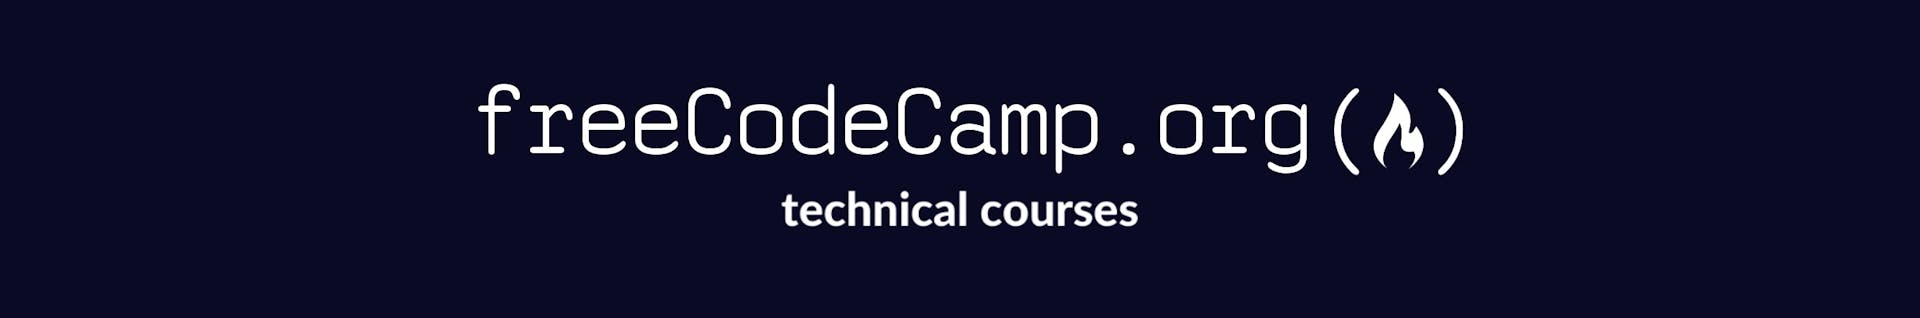 freeCodeCamp YouTube channel cover image